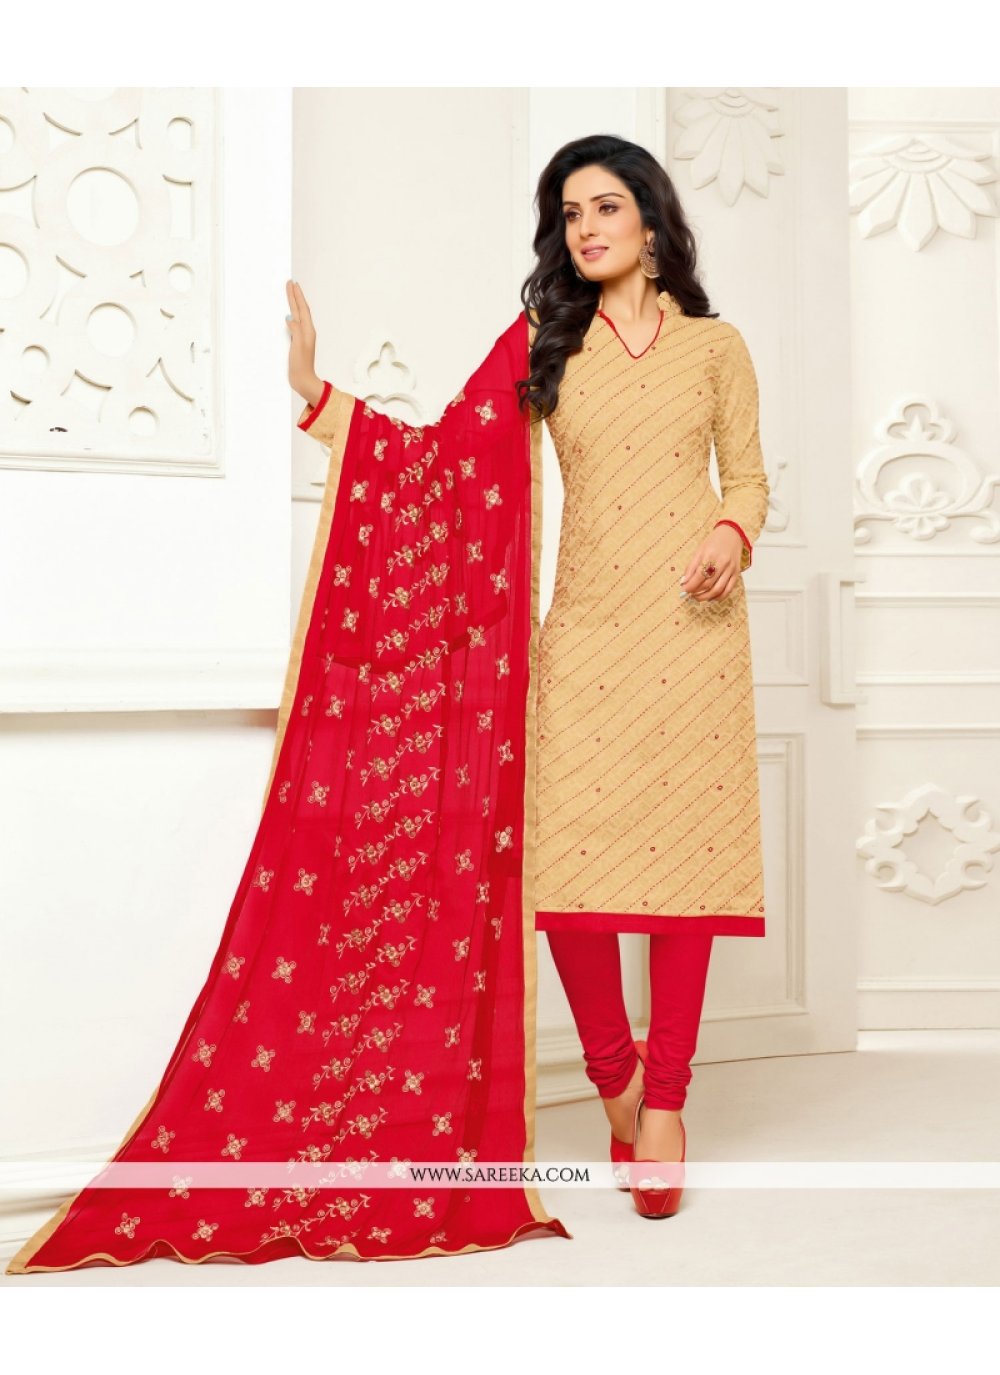 Buy Online Cotton Cream and Red Embroidered Work Churidar Designer Suit :  63598 